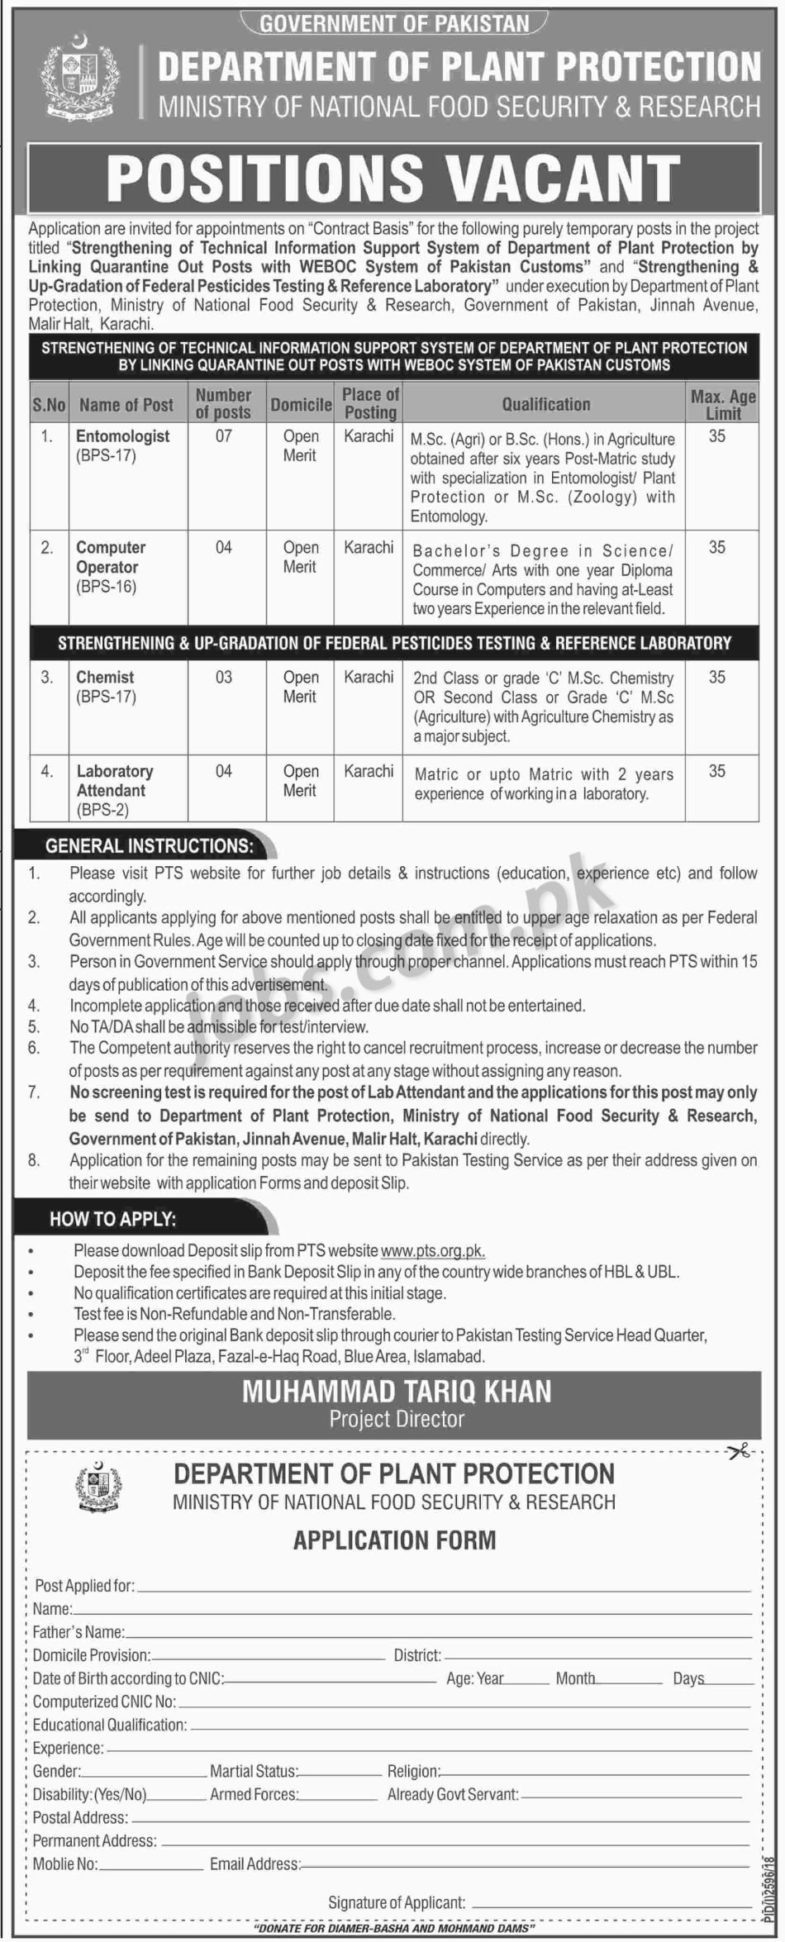 Ministry of National Food Security & Research Pakistan Jobs 2019 for 18+ Computer Operators, Agri, Chemist & Lab Staff (Download PTS Form)